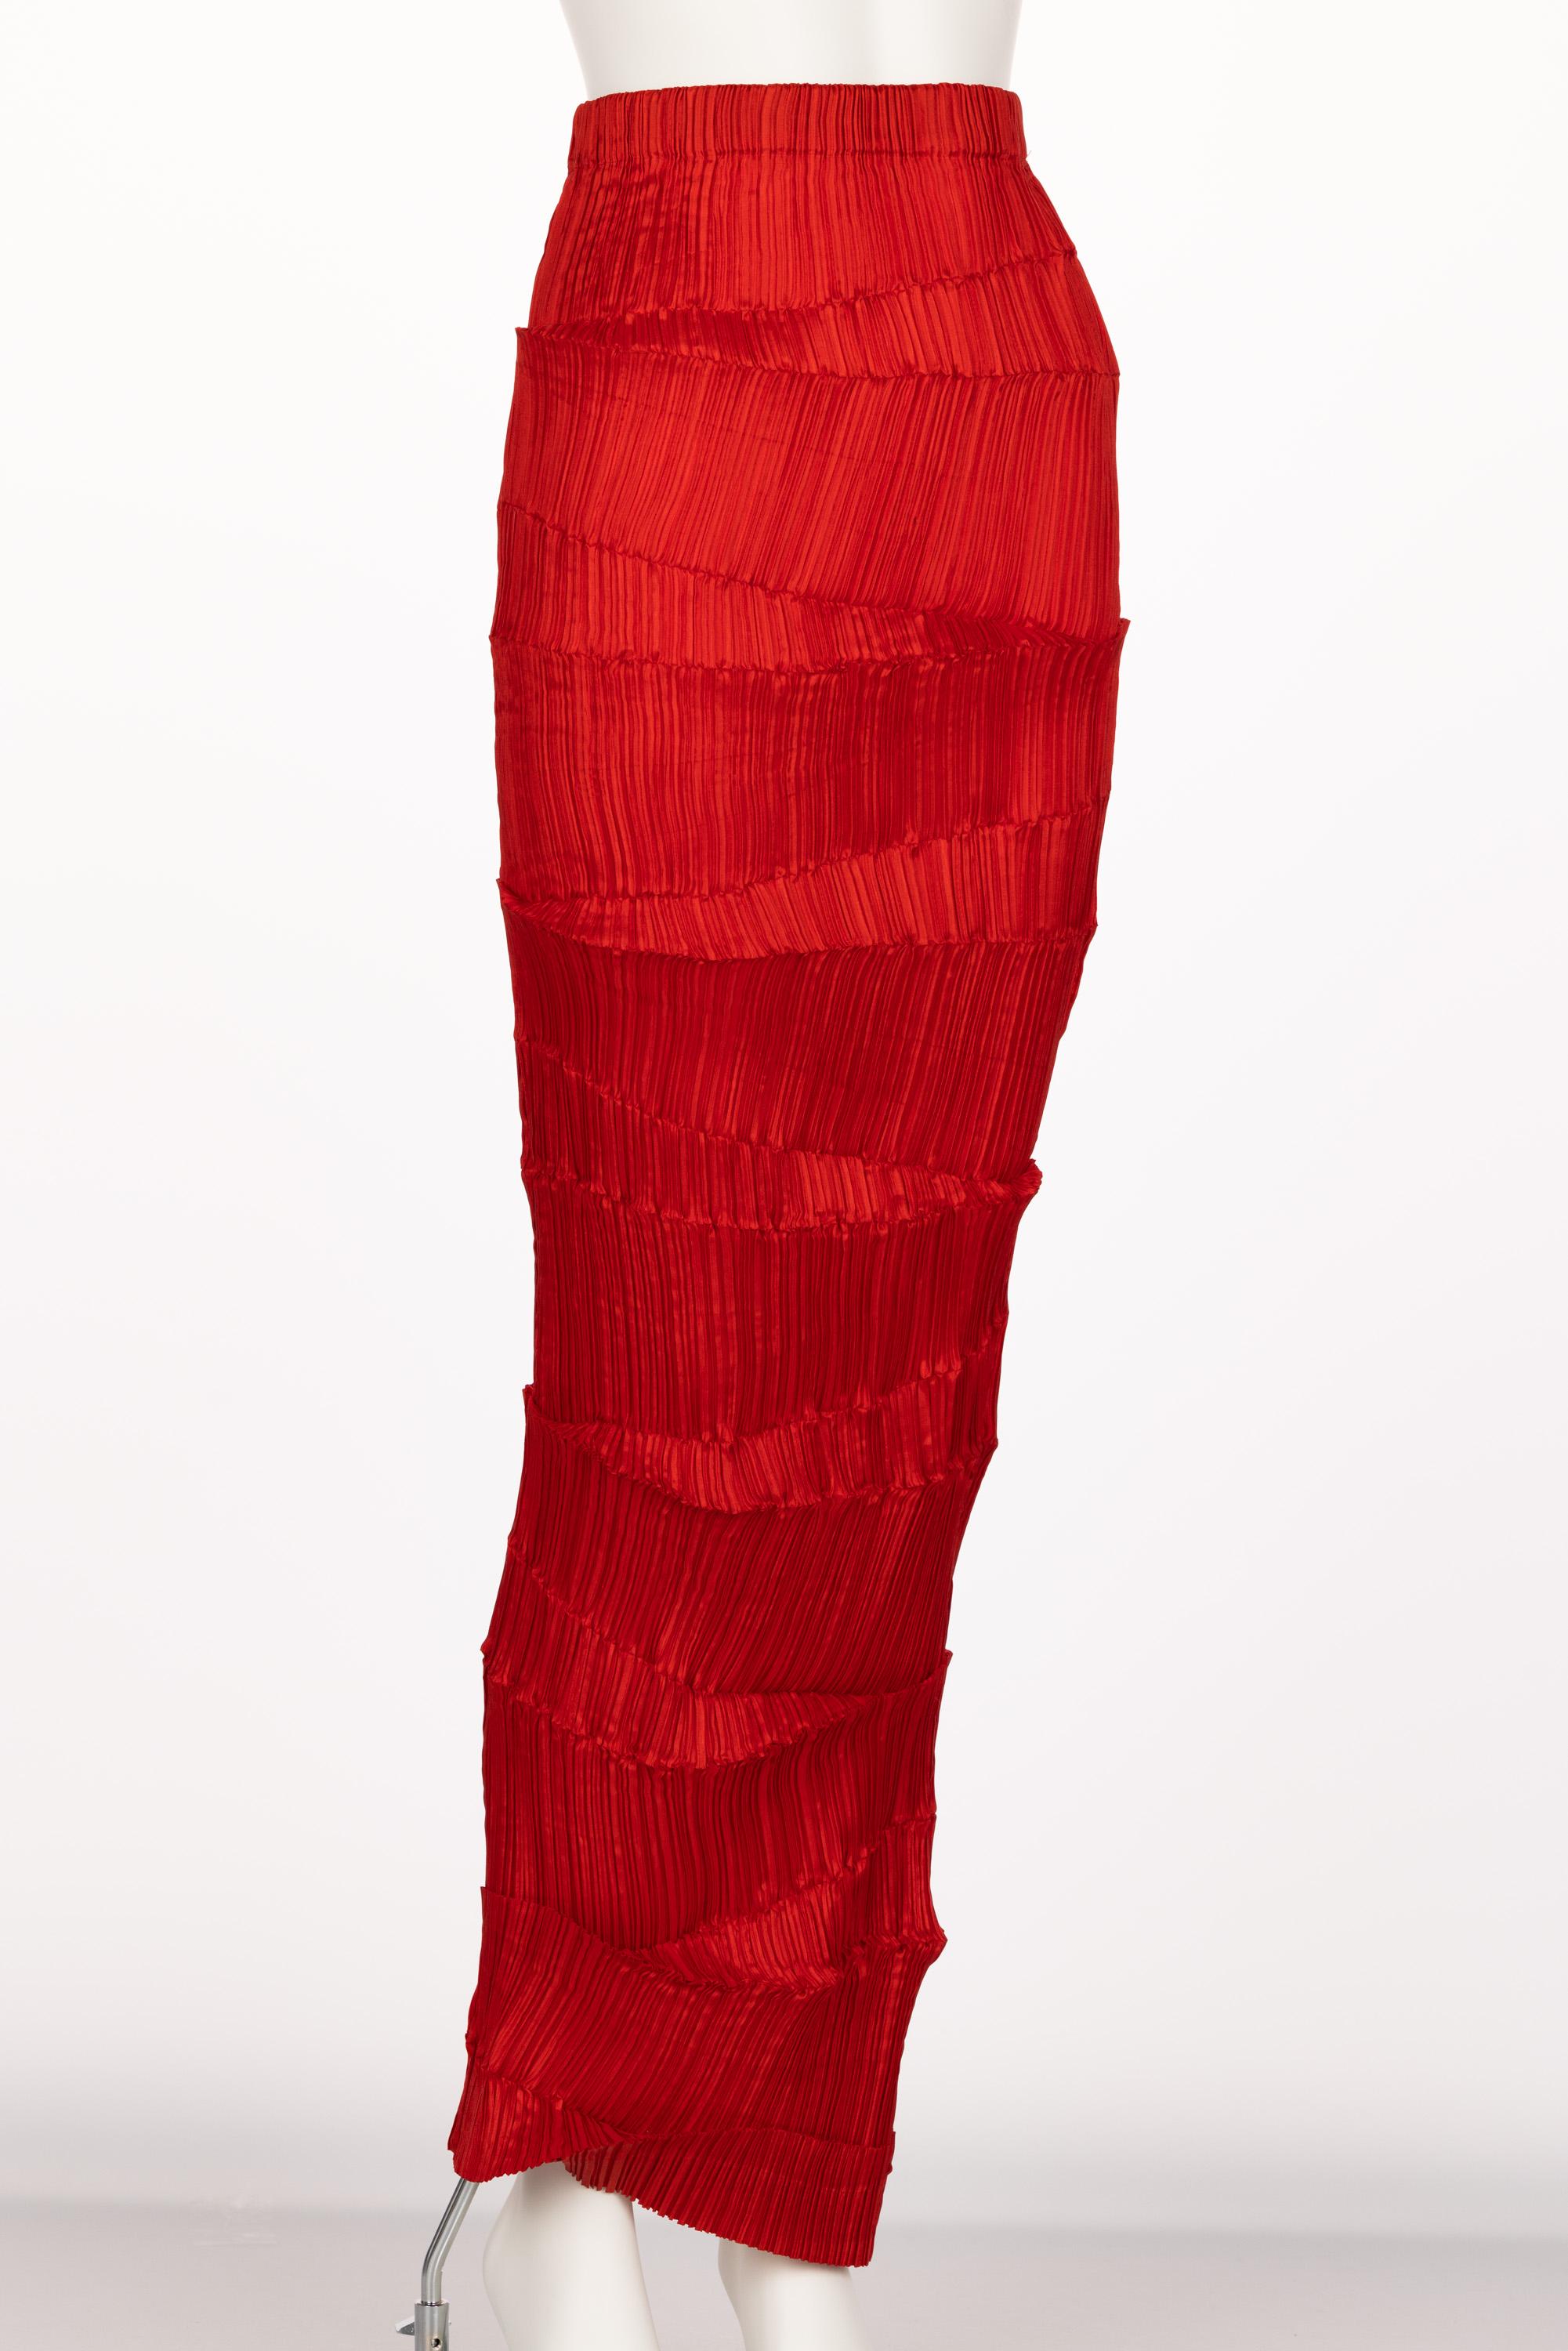 Issey Miyake Pleated Red Maxi Skirt 1990s 3